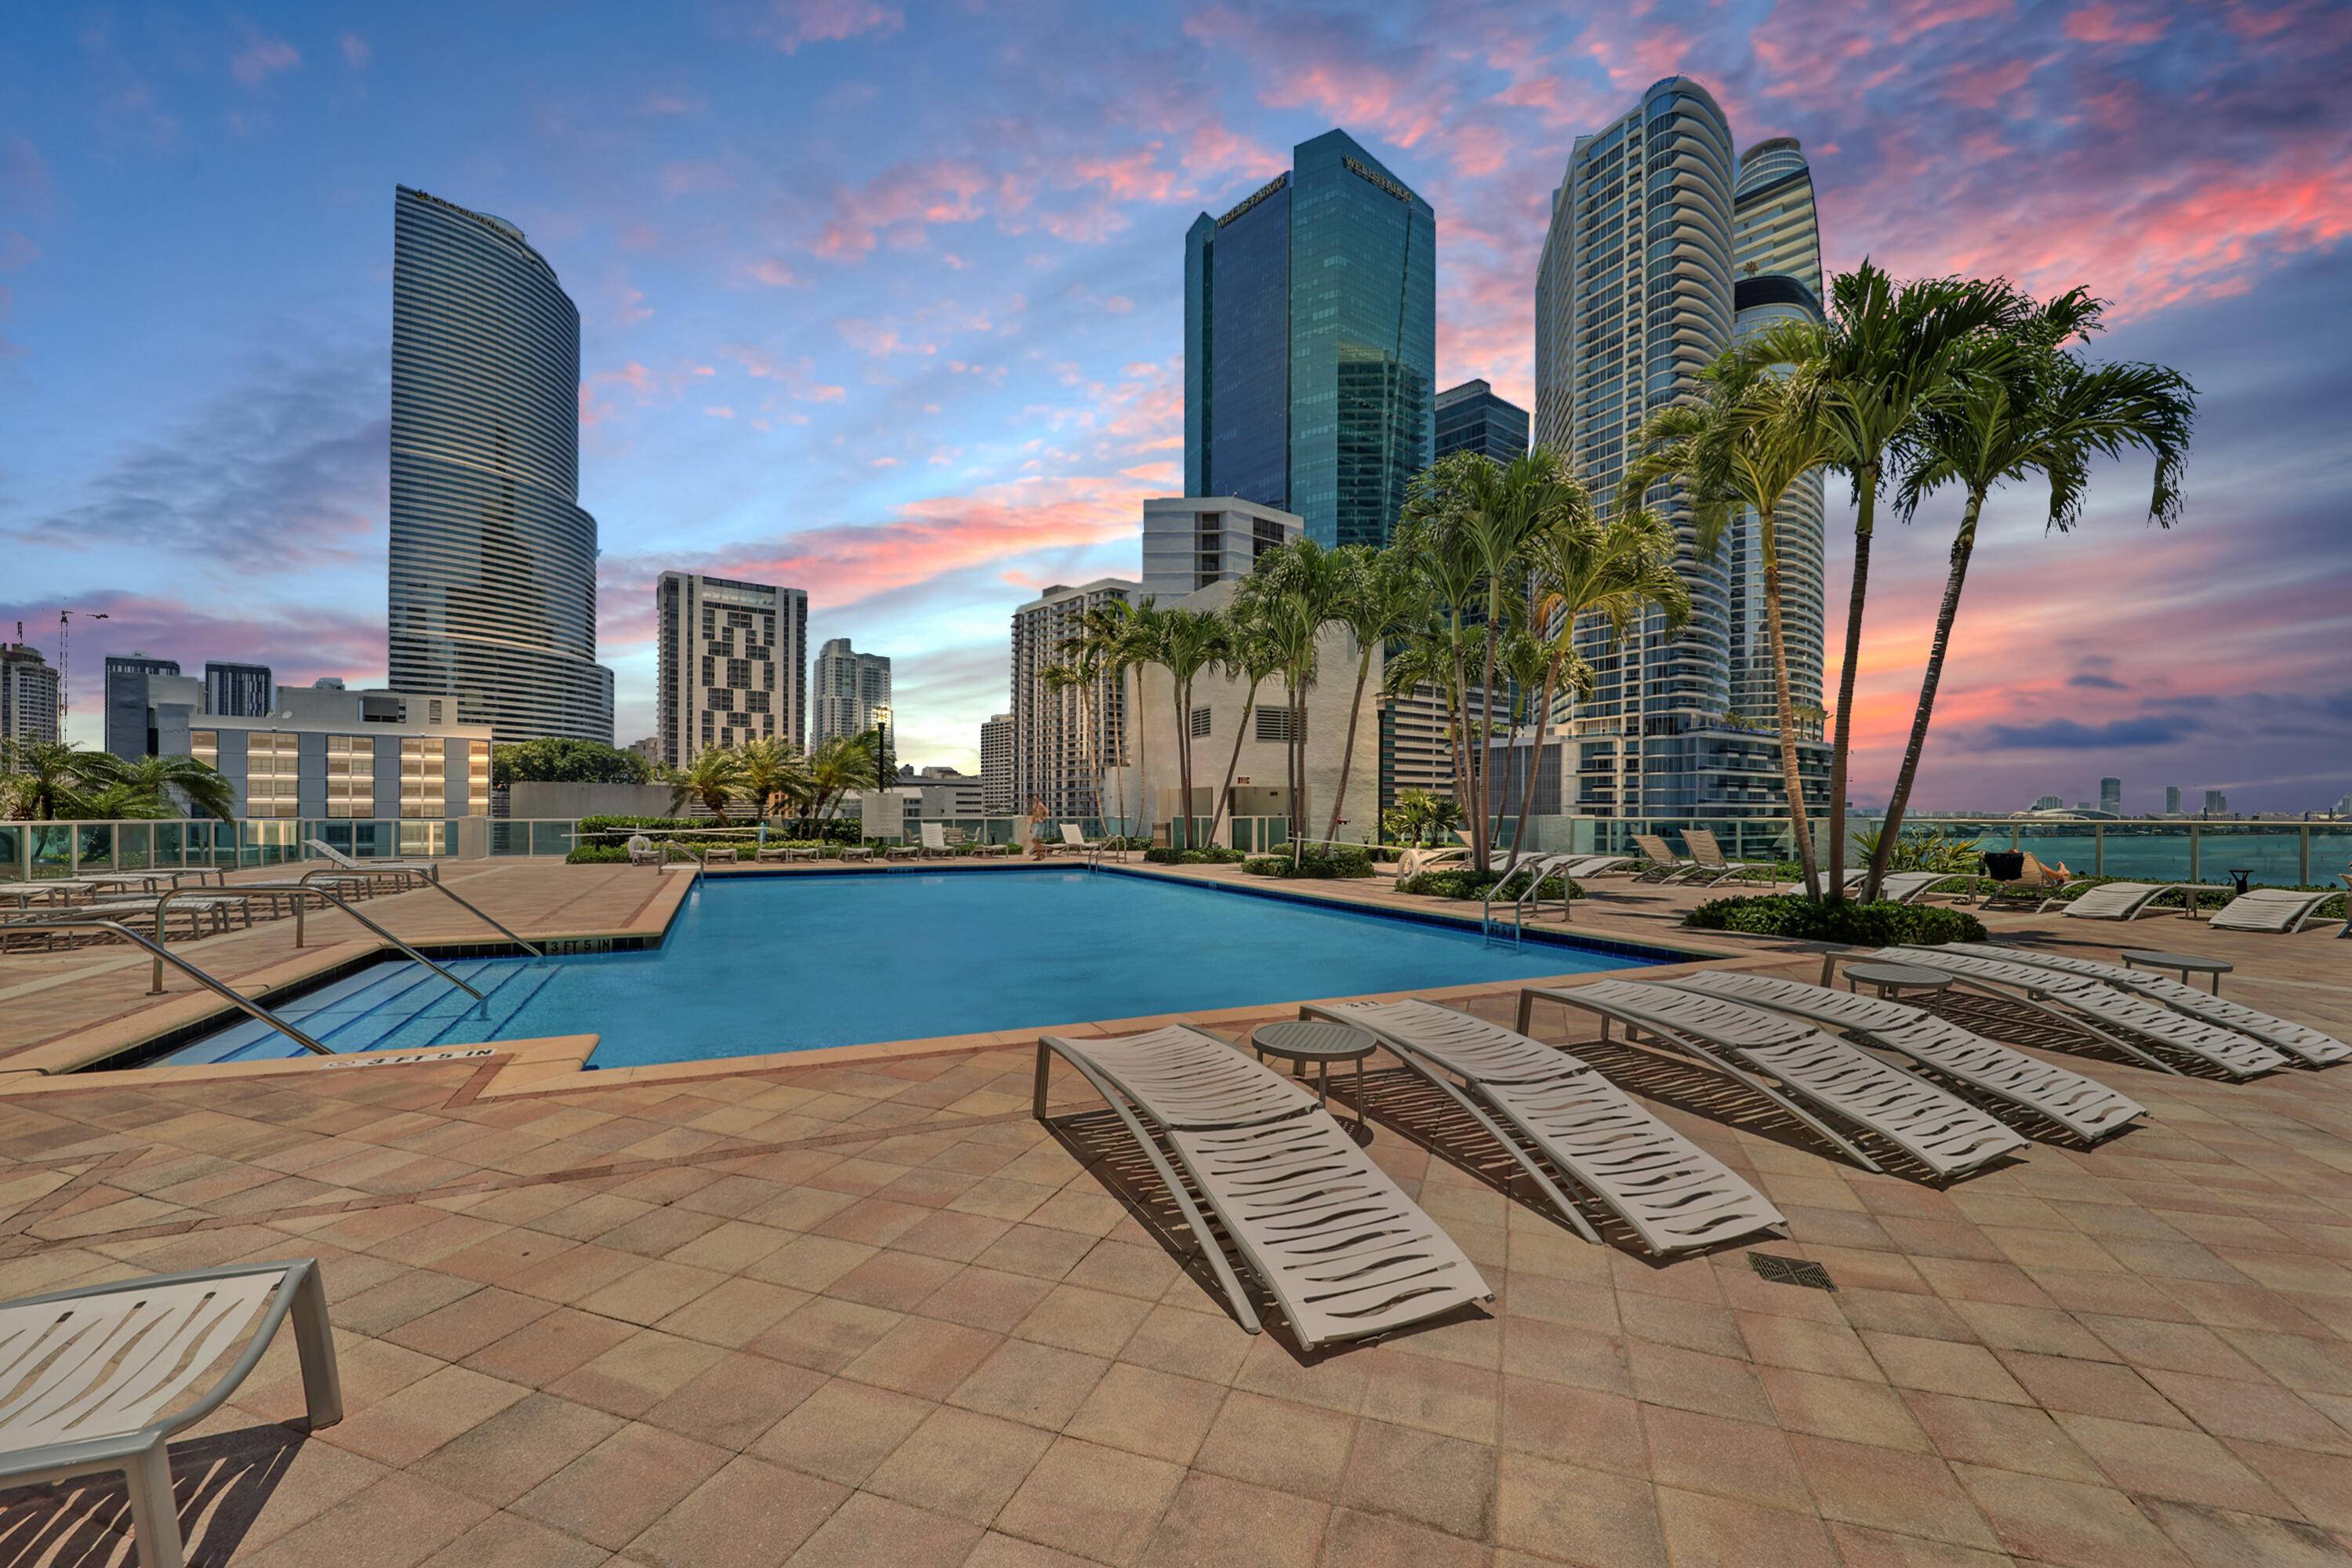 AMAZING OPPORTUNITY TO EXPERIENCE THE BEST OF URBAN LIVING IN THE HEART OF BRICKELL WITH THIS STUNNING TWO LEVEL, LOFT STYLE ONE BEDROOM, ONE AND HALF BATHROOM CONDO.